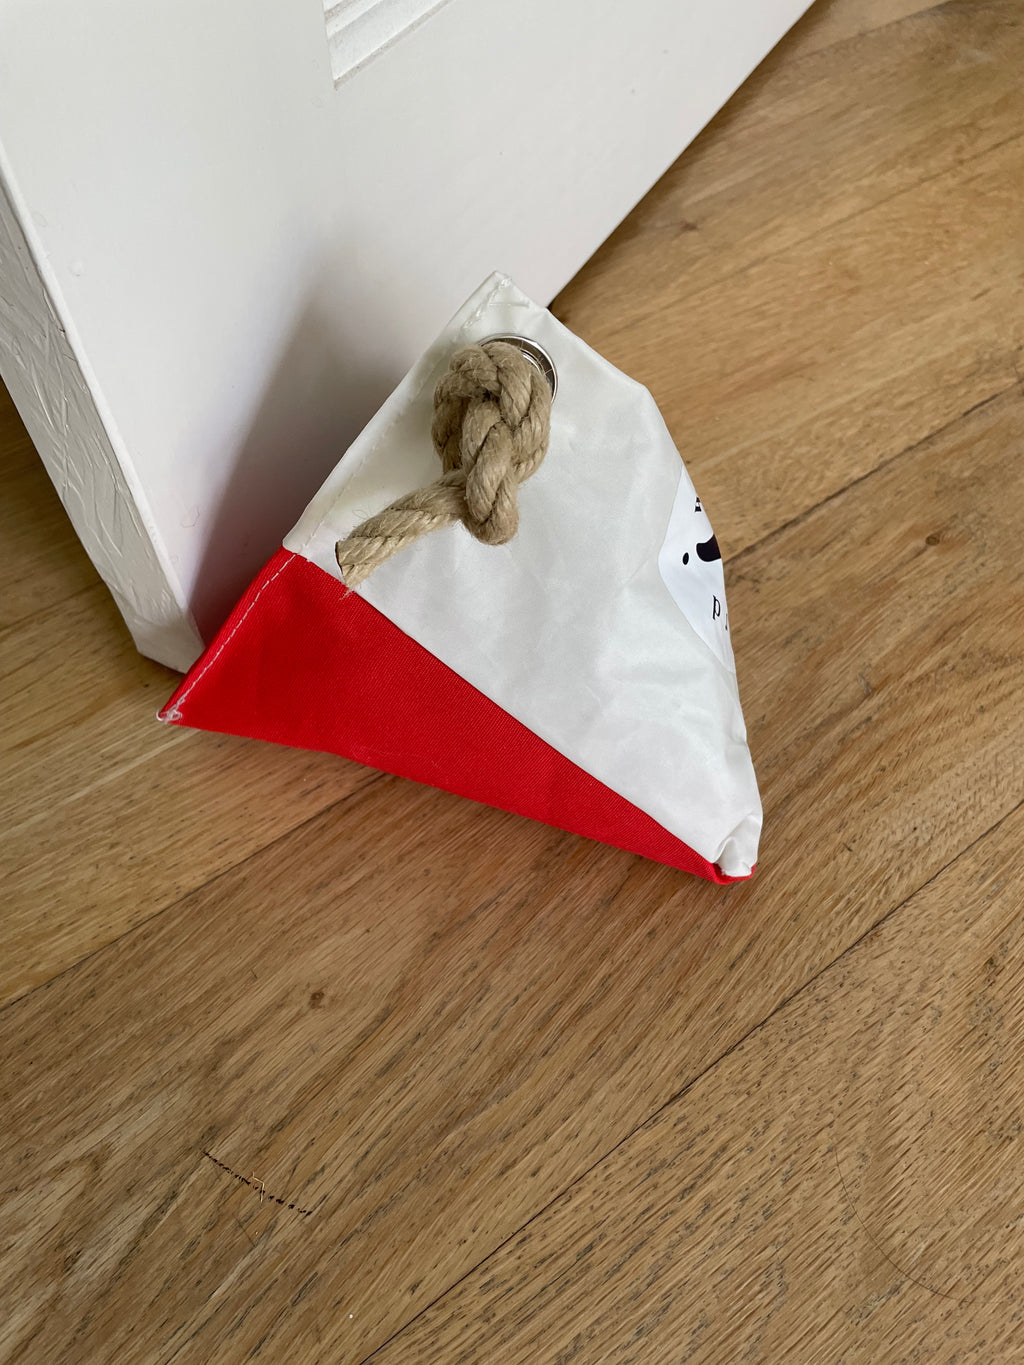 Recycled Sailcloth Doorstops - small